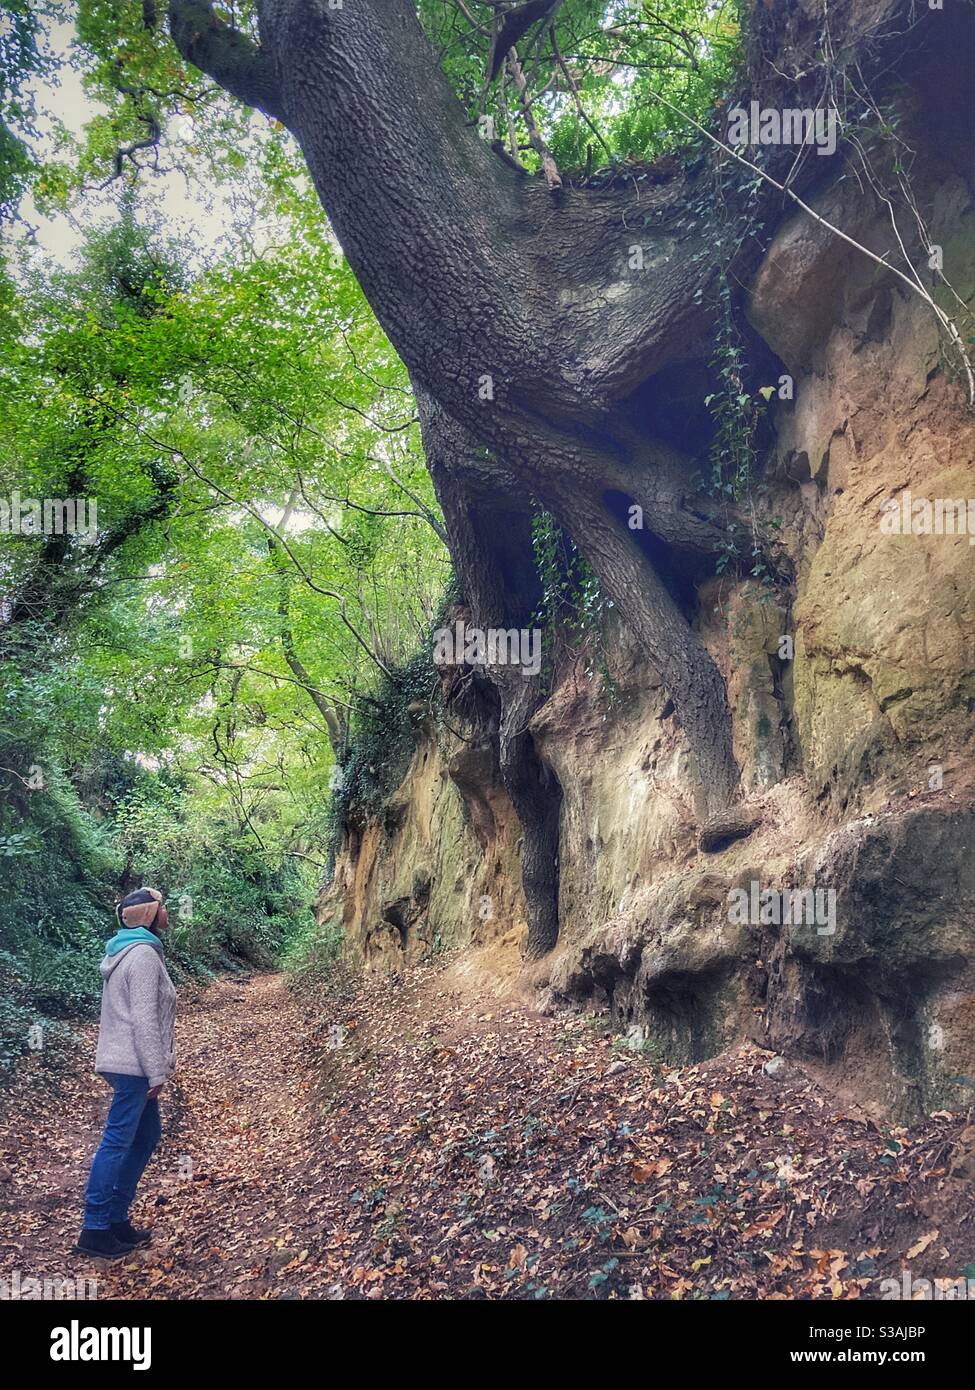 Woman hiker, looking at an enormous tree with exposed roots  in an ancient sunken hollow way or drovers track, East Chinnock, Somerset, England Stock Photo